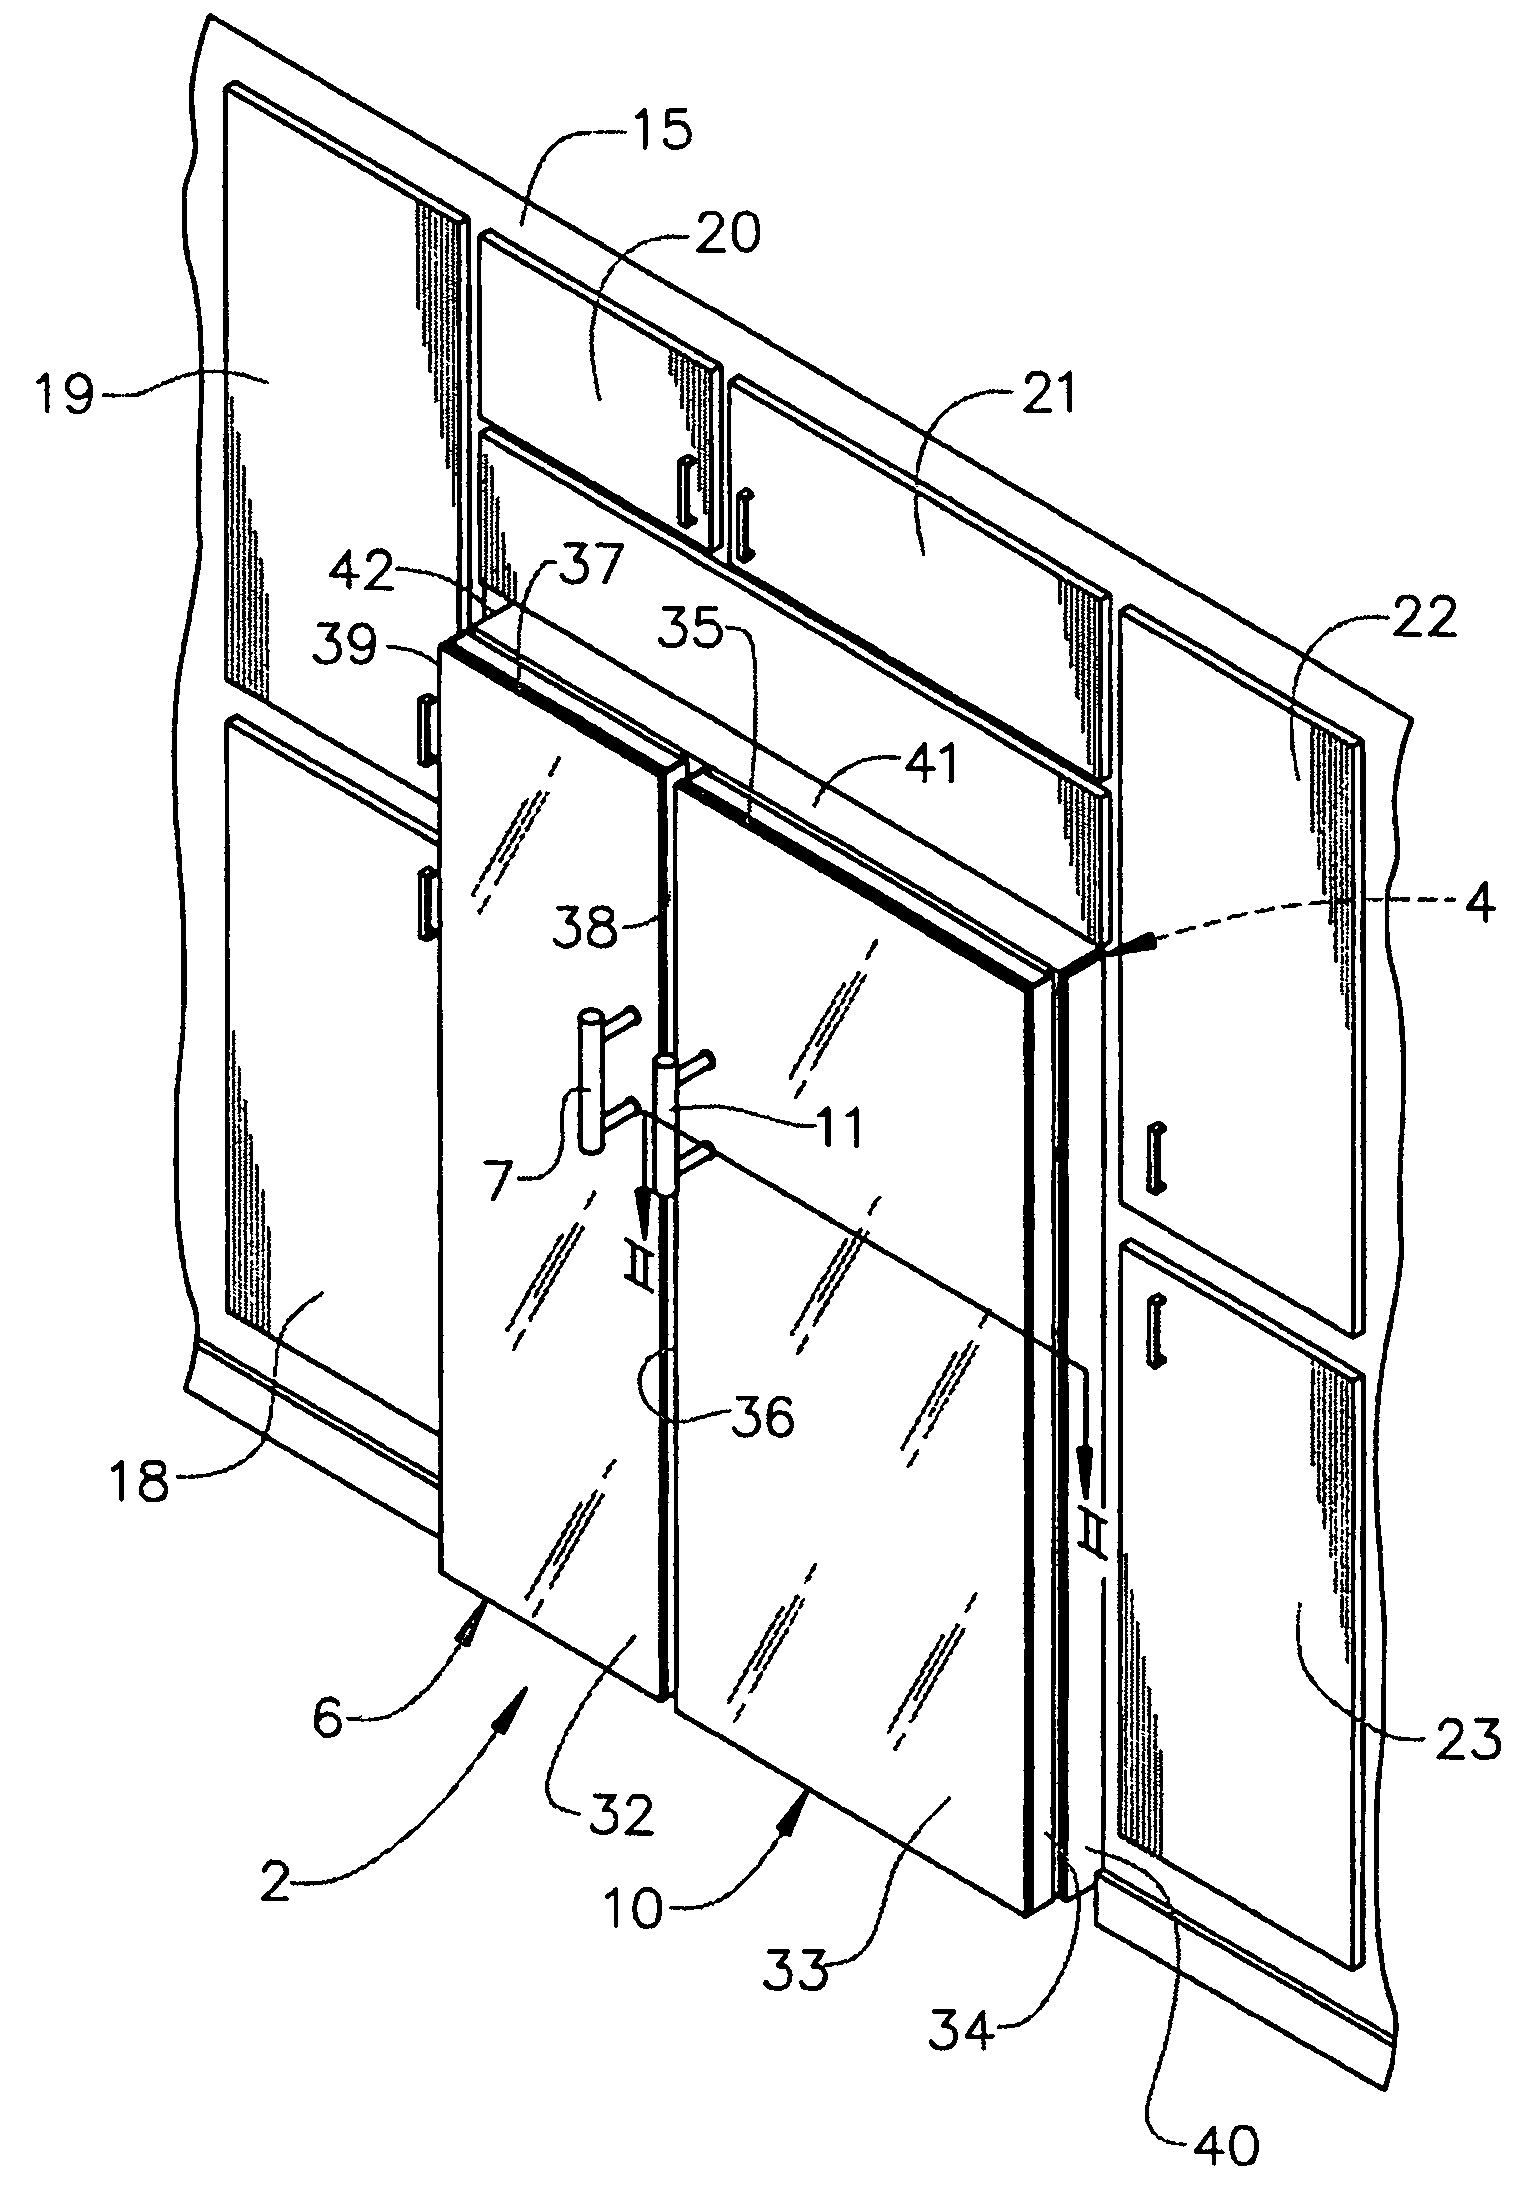 Kitchen appliance having a floating glass panel